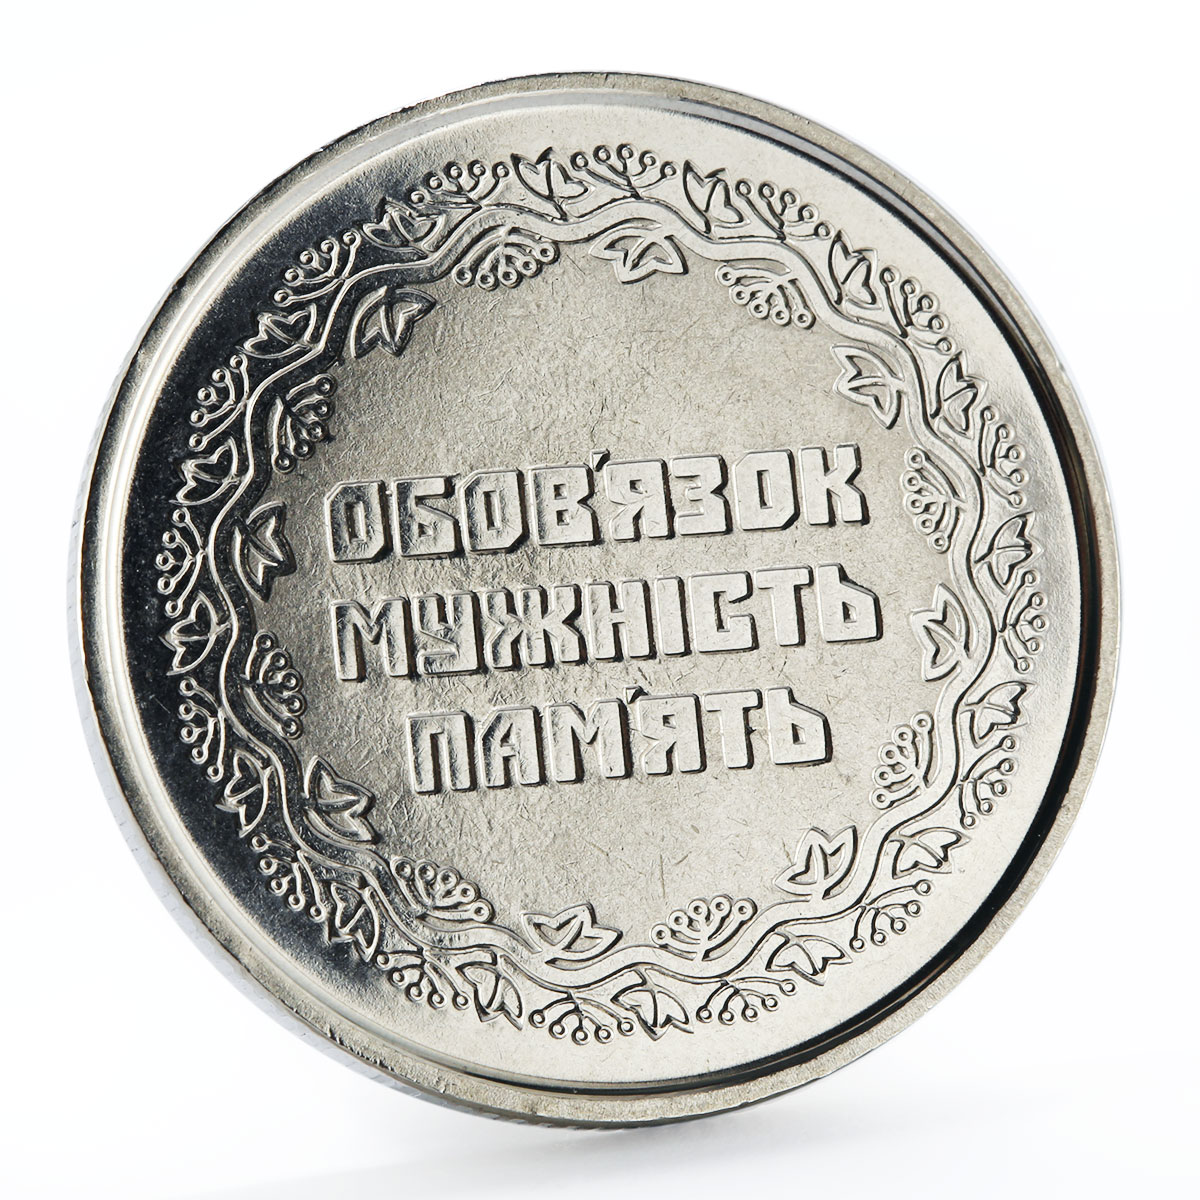 Ukraine 10 hryven Participants in hostilities in country 25 coins per roll 2019